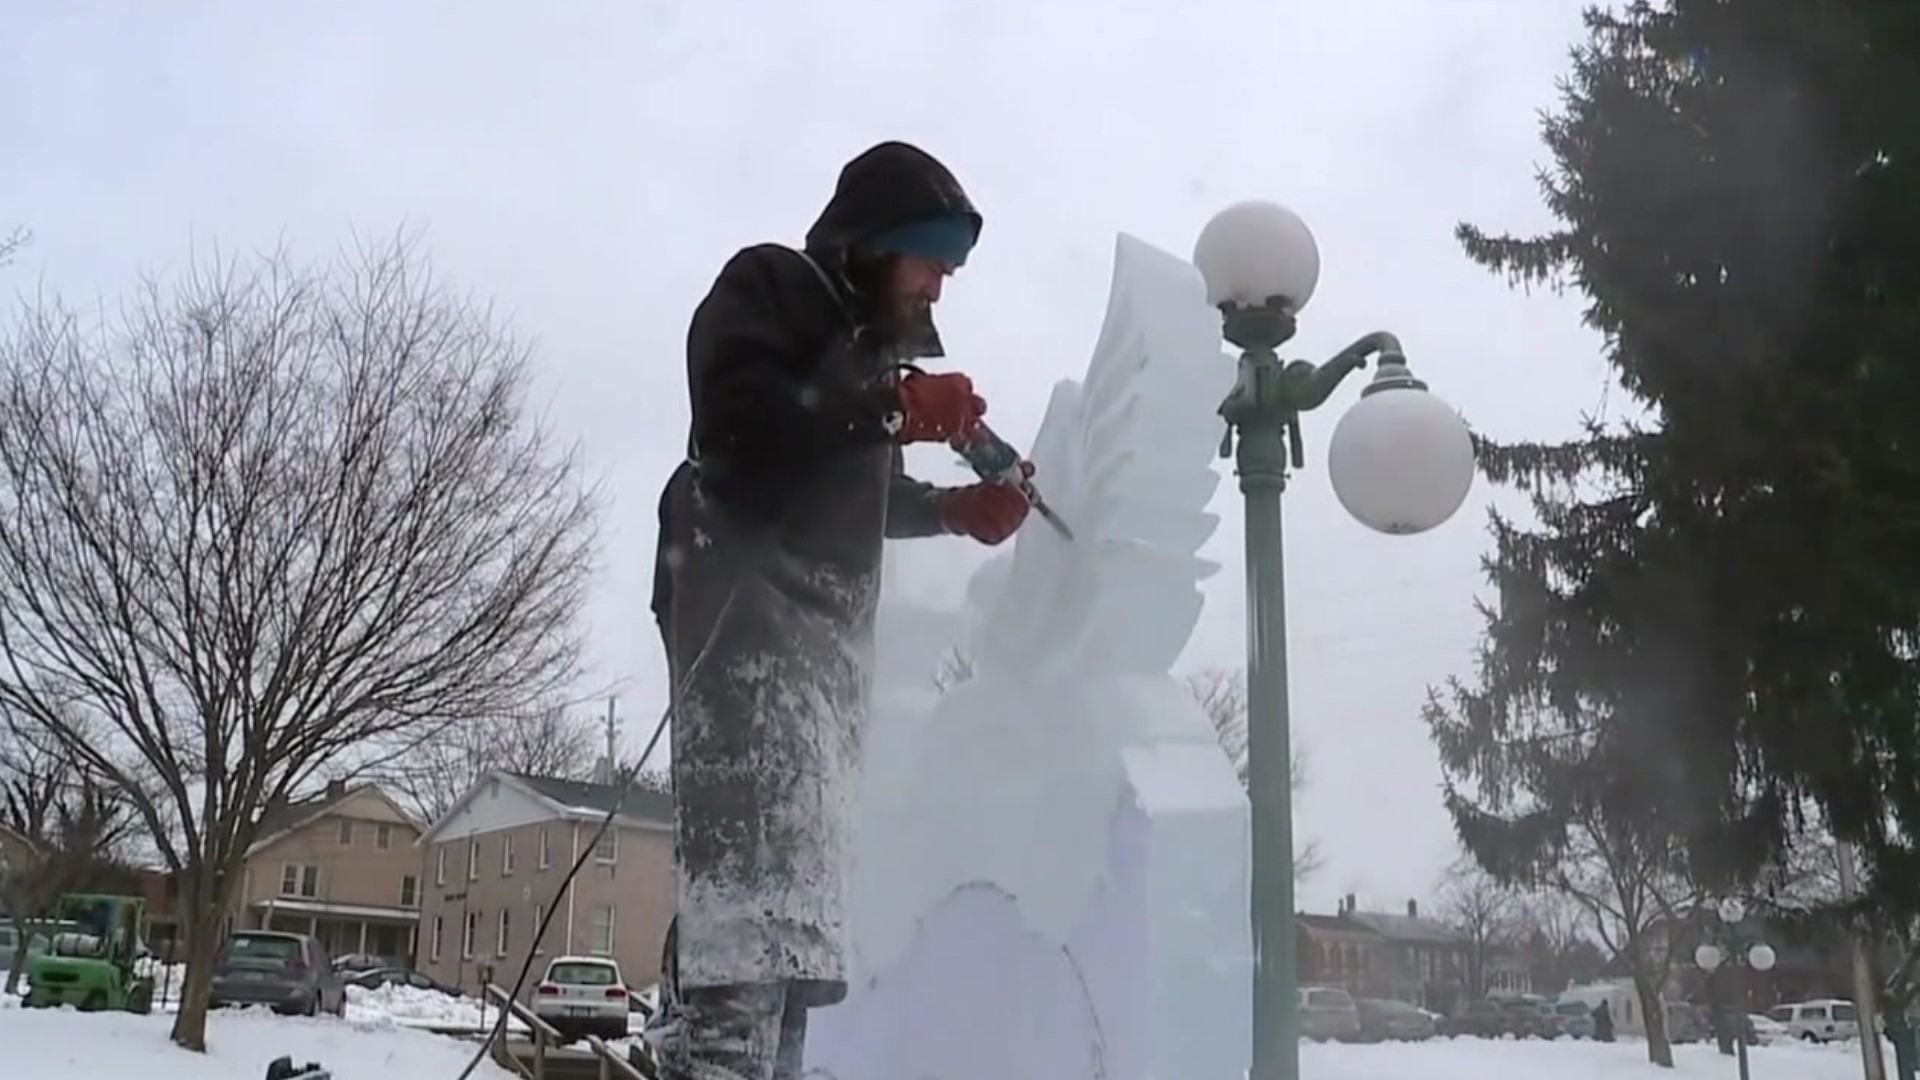 The Heart of Lewisburg Ice Festival is back after taking a year off.